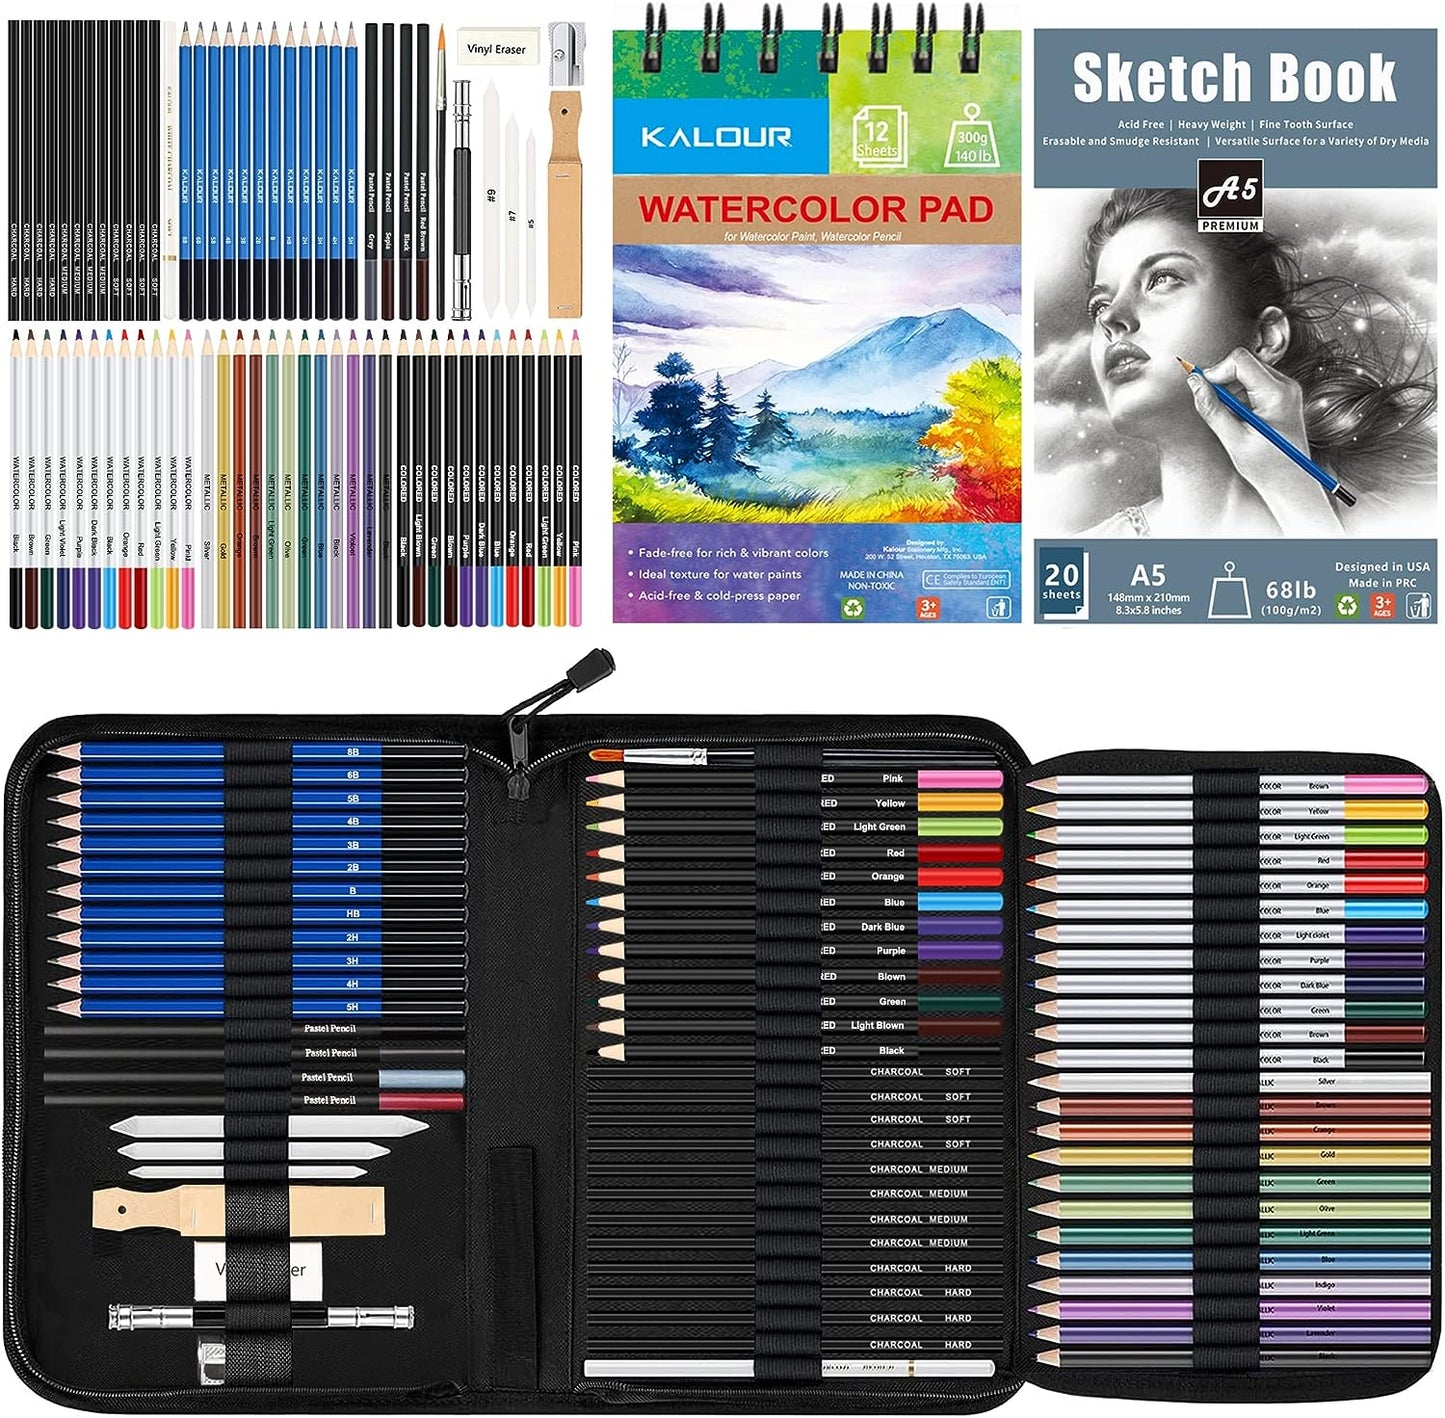 KALOUR 72-Pack Sketch Drawing Pencils Kit with Sketchbook and 3-color  Drawing Paper,Tin Box,Include Graphite,Charcoal,Drawing Glove and Artists